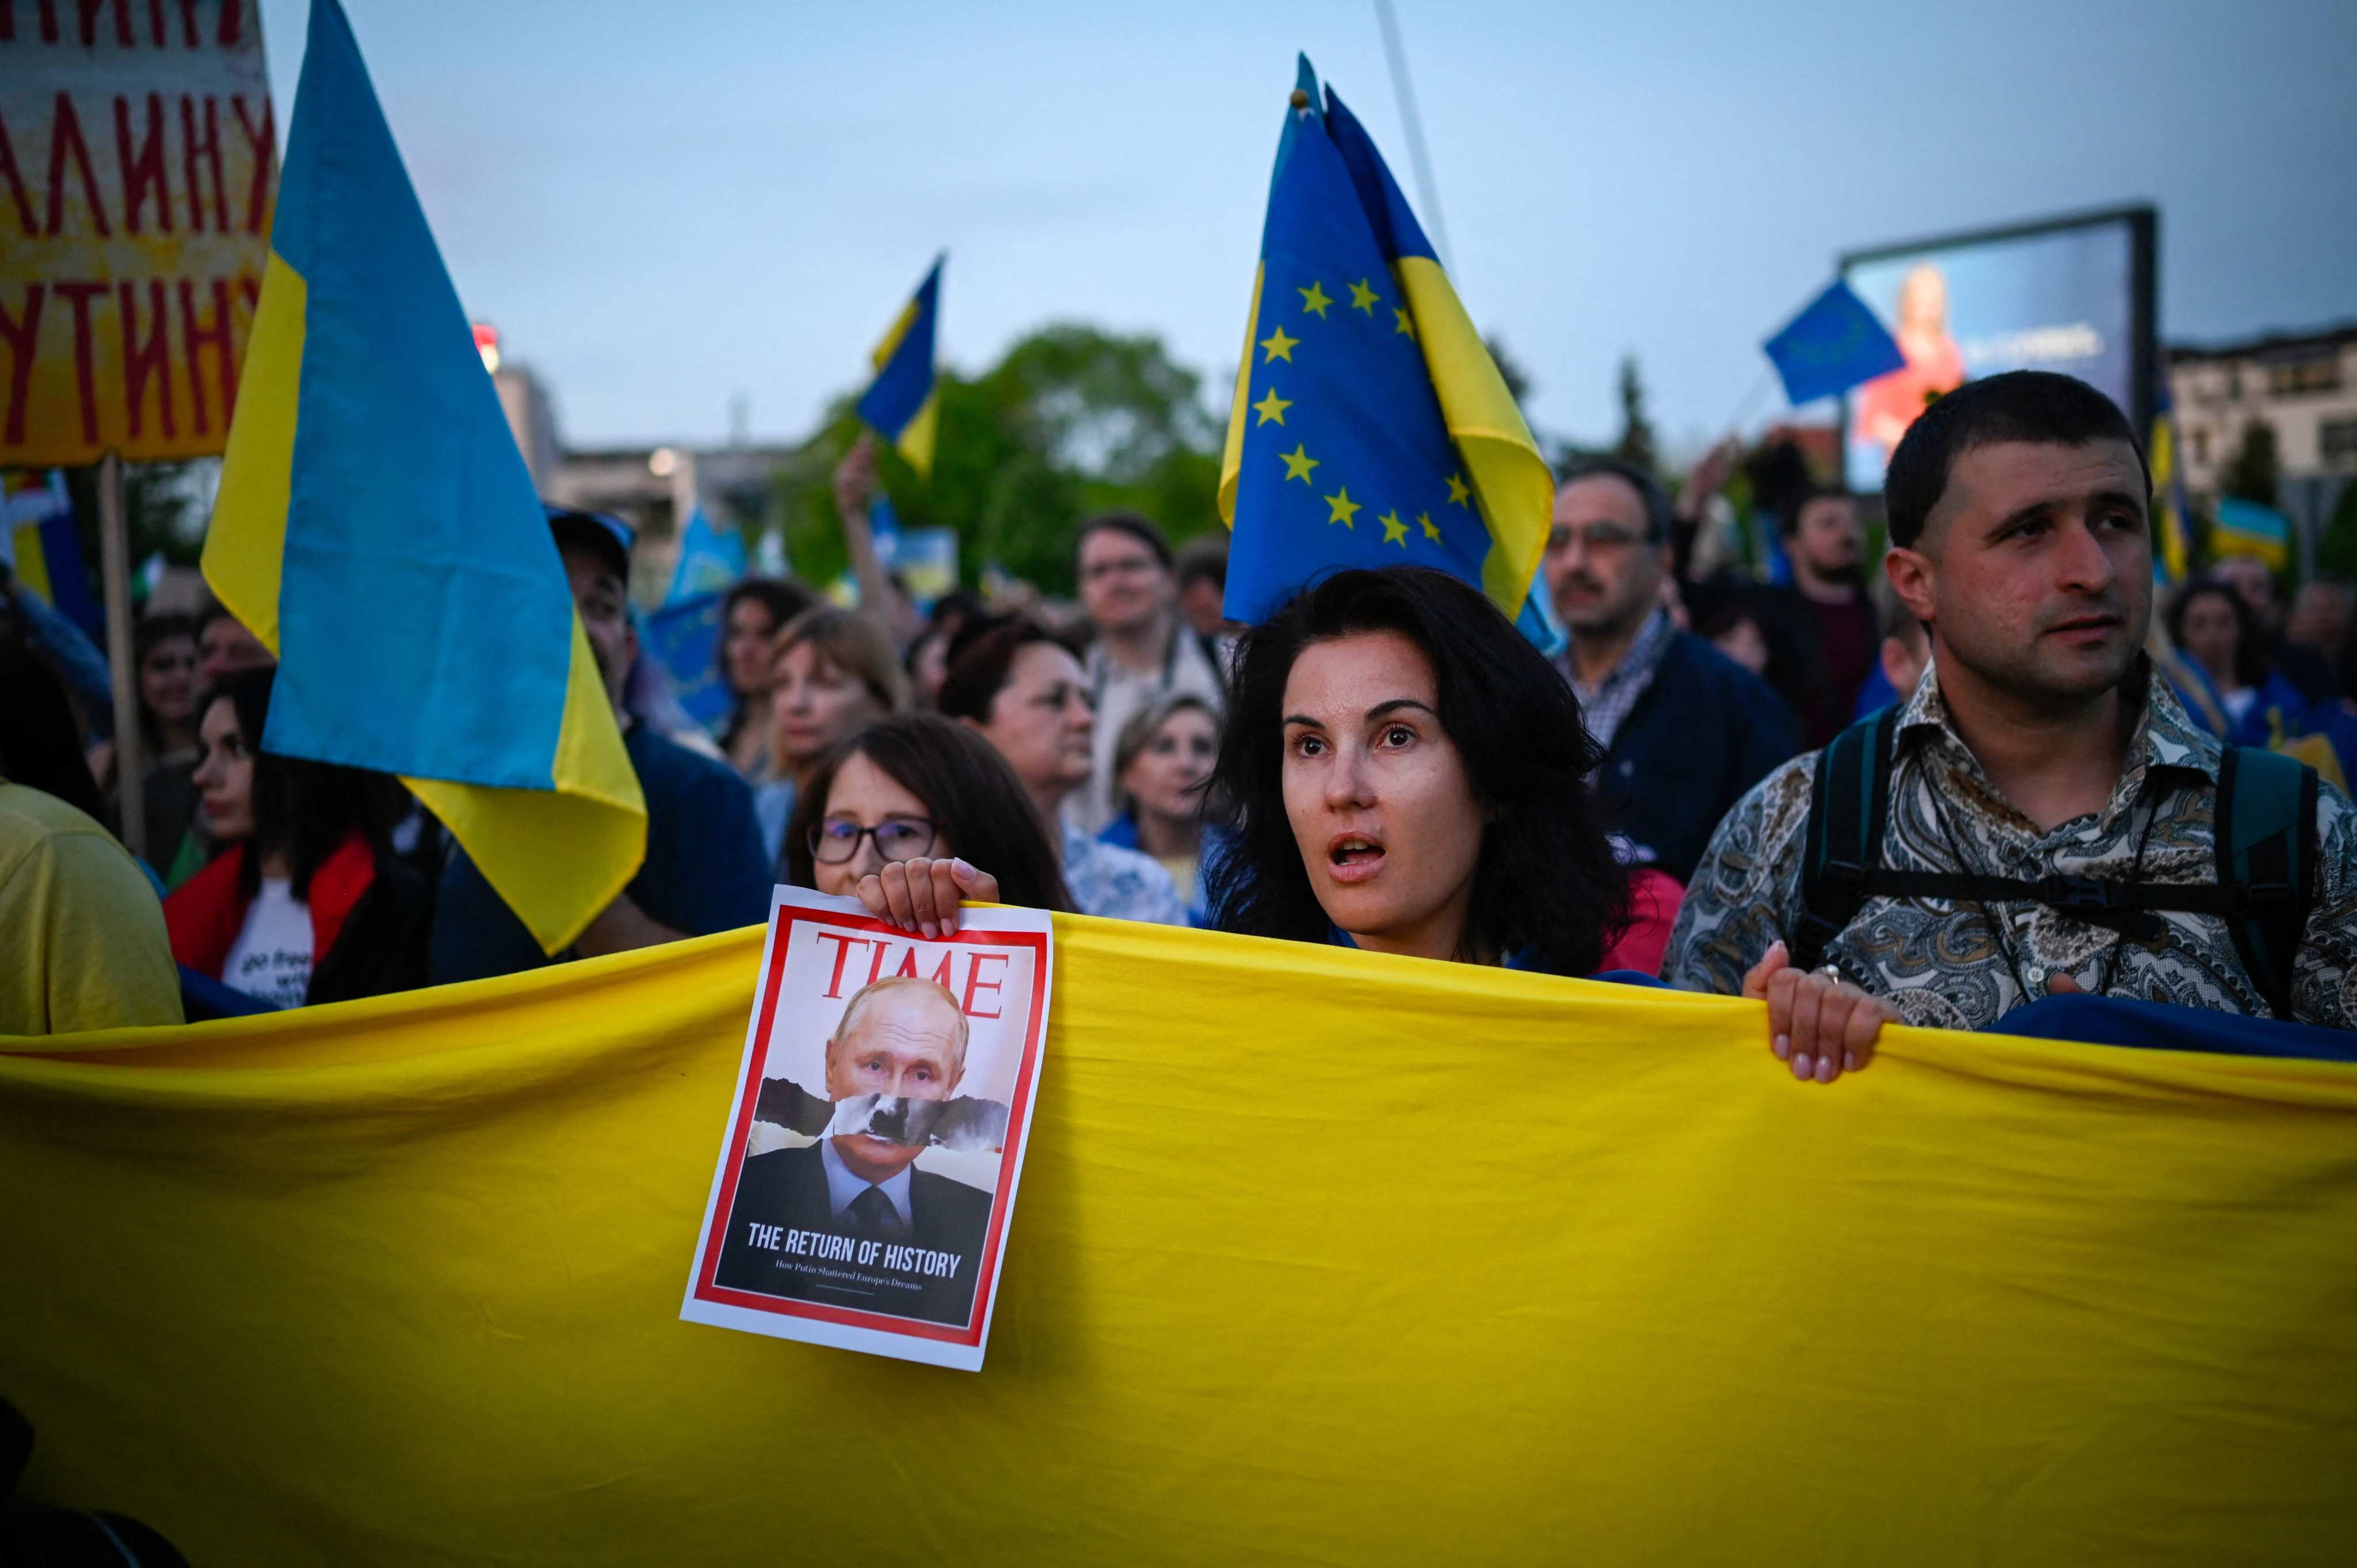 Demonstrators hold the Ukrainian flag during a protest against the Russian invasion of Ukraine, in Sofia, Bulgaria, on May 9. The country, which has historically close ties with Russia, is now split between pro-Russia and pro-Ukraine supporters. Photo: AFP